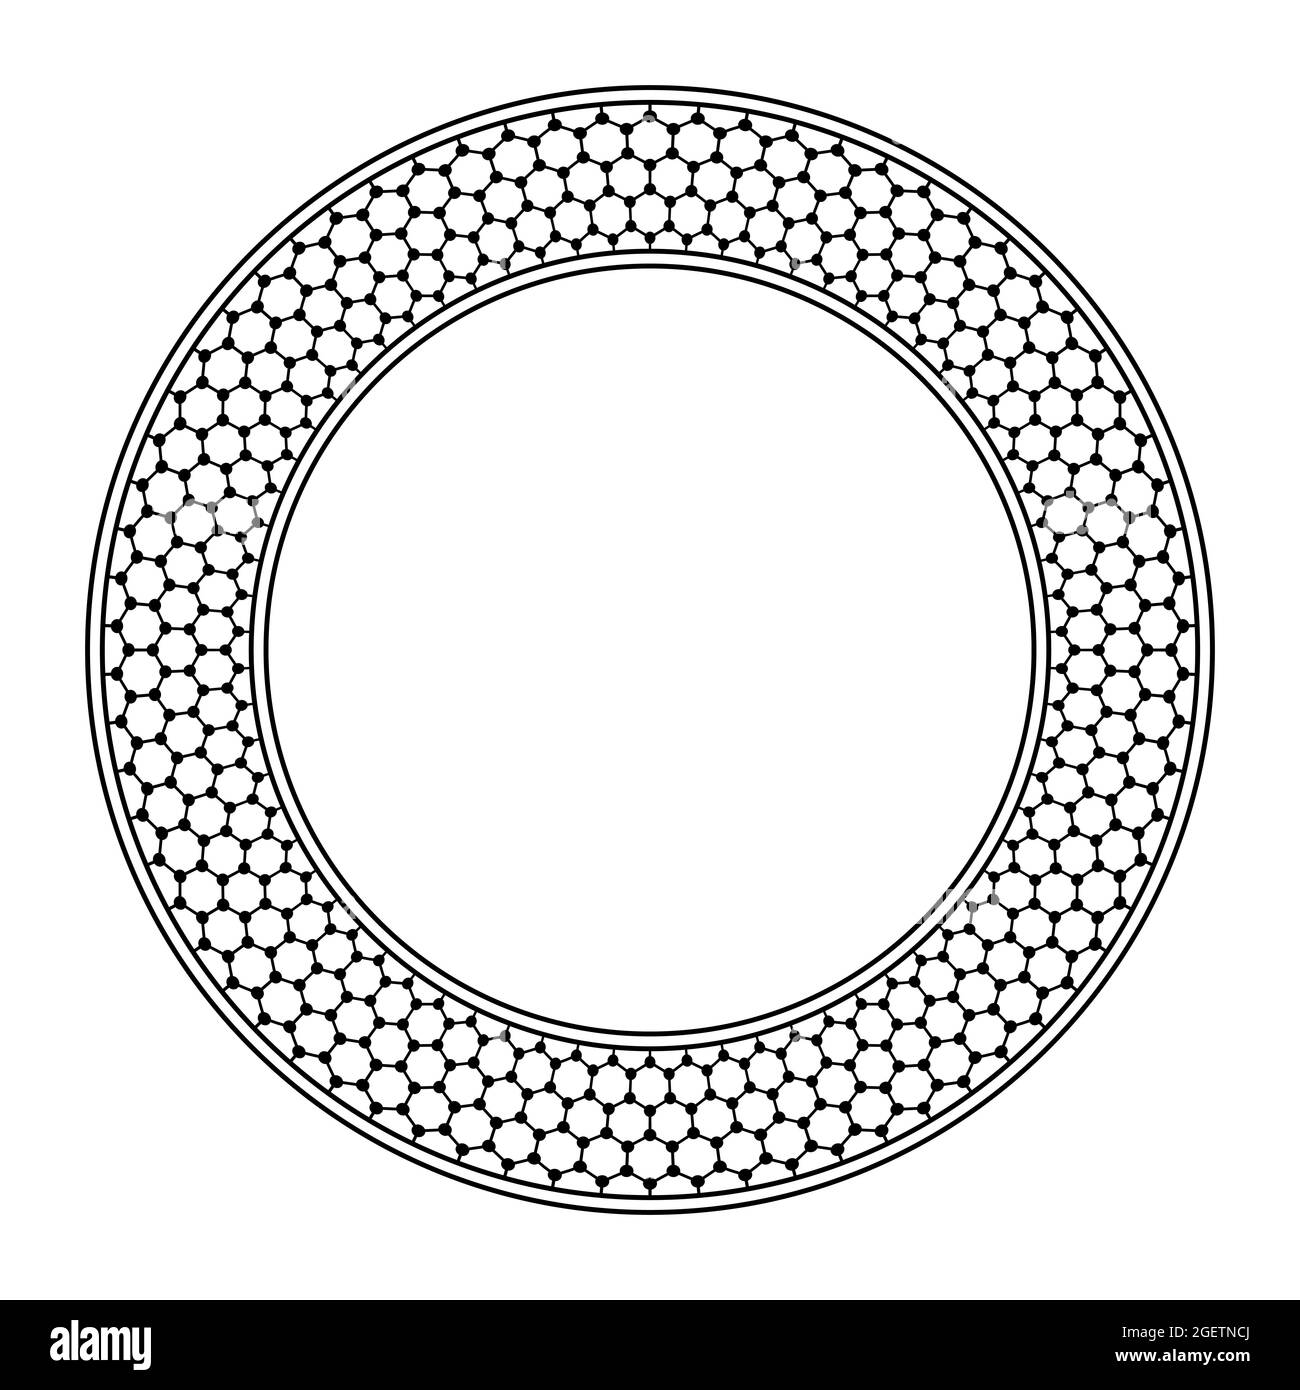 Circle frame with graphene pattern. Border, framed with circles, with seamless schematic molecular graphene structure, carbon atoms in hexagonal grid. Stock Photo